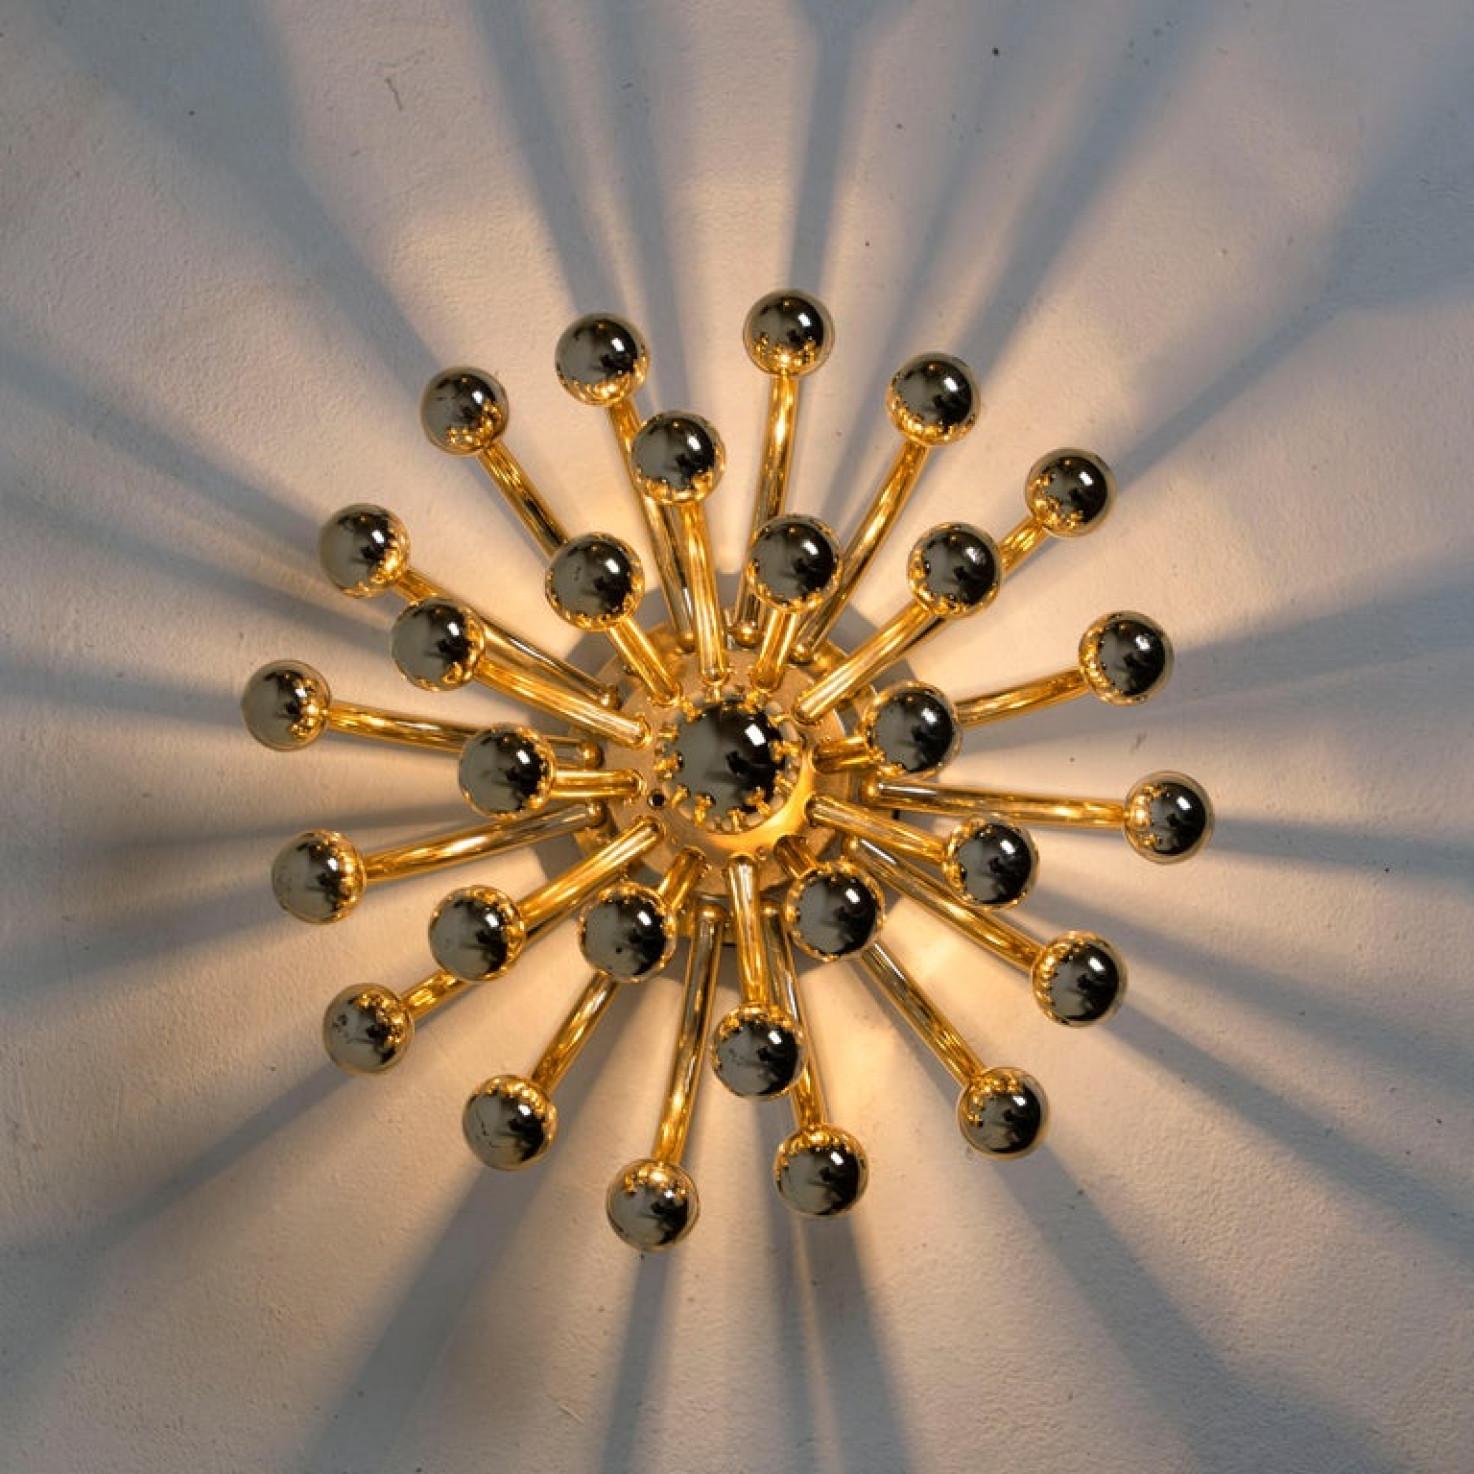 1 of the 4 Valenti Luce Pistillino Wall Lights, Italy, 1970 For Sale 6